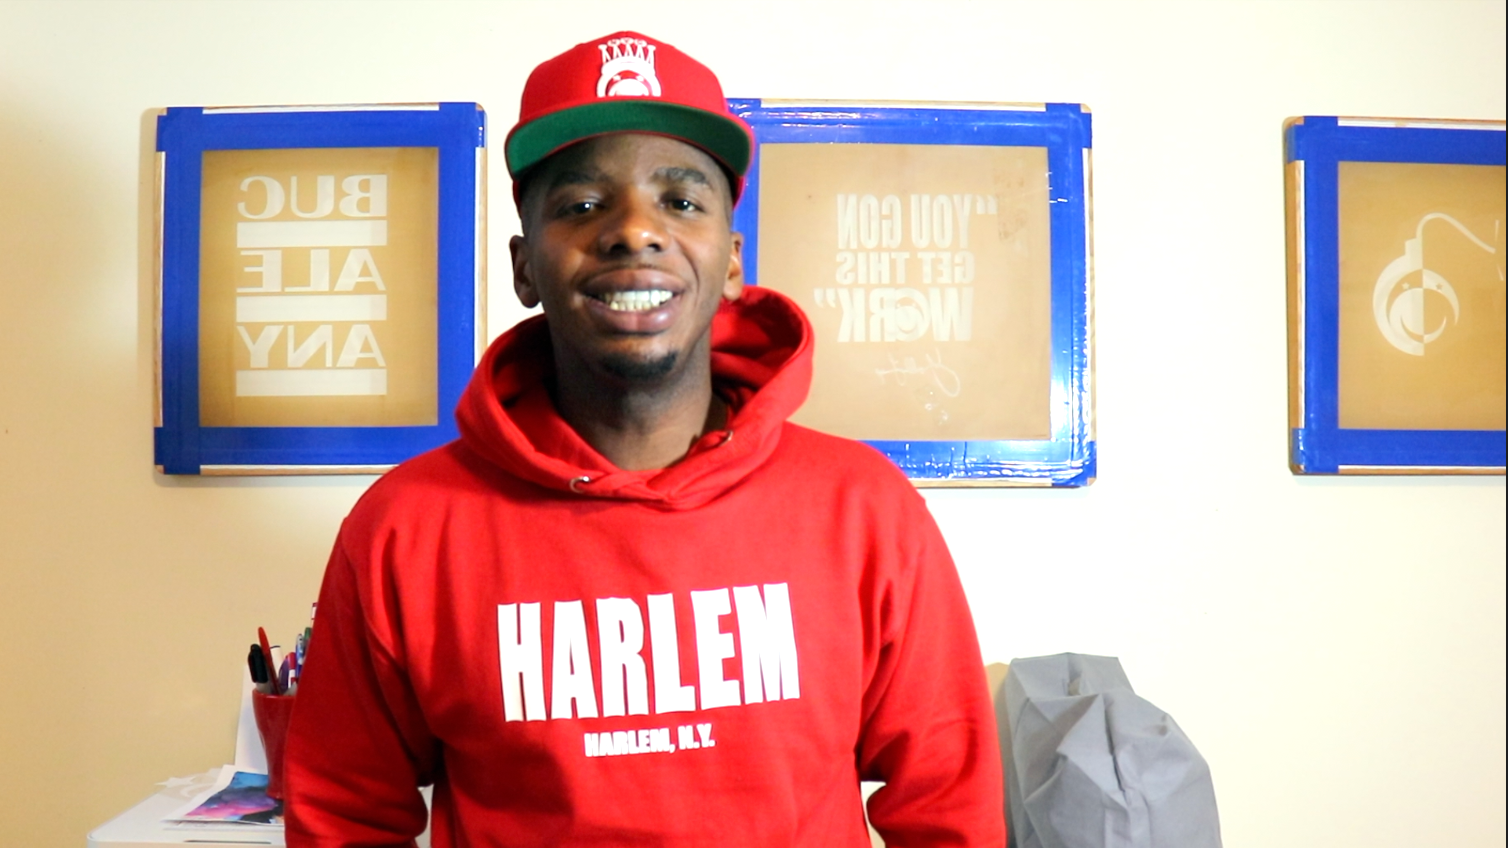 The Best HARLEM Printing Custom Service for T-shirts, Hoodies, Hats! Contact Us Now!